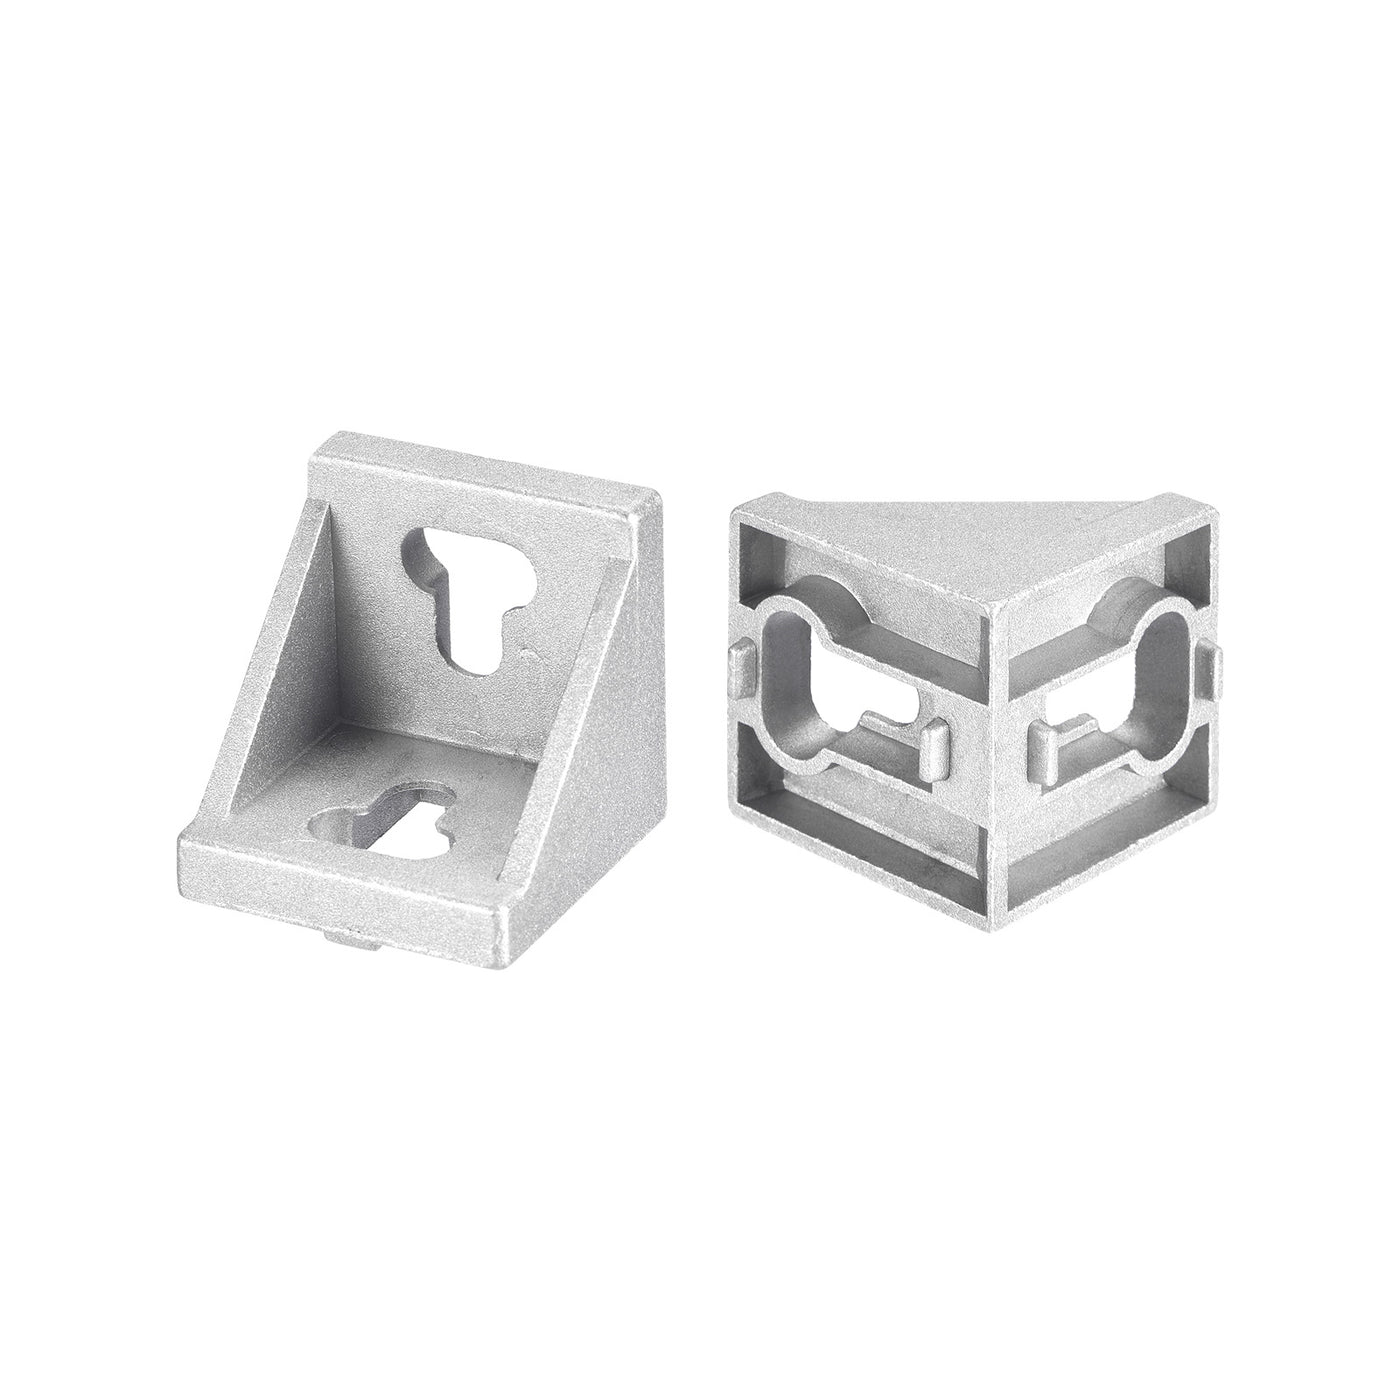 uxcell Uxcell 4Pcs Inside Corner Bracket Gusset, 42x42x43mm 4545 Angle Connectors for 4545/5050 Series Aluminum Extrusion Profile Silver